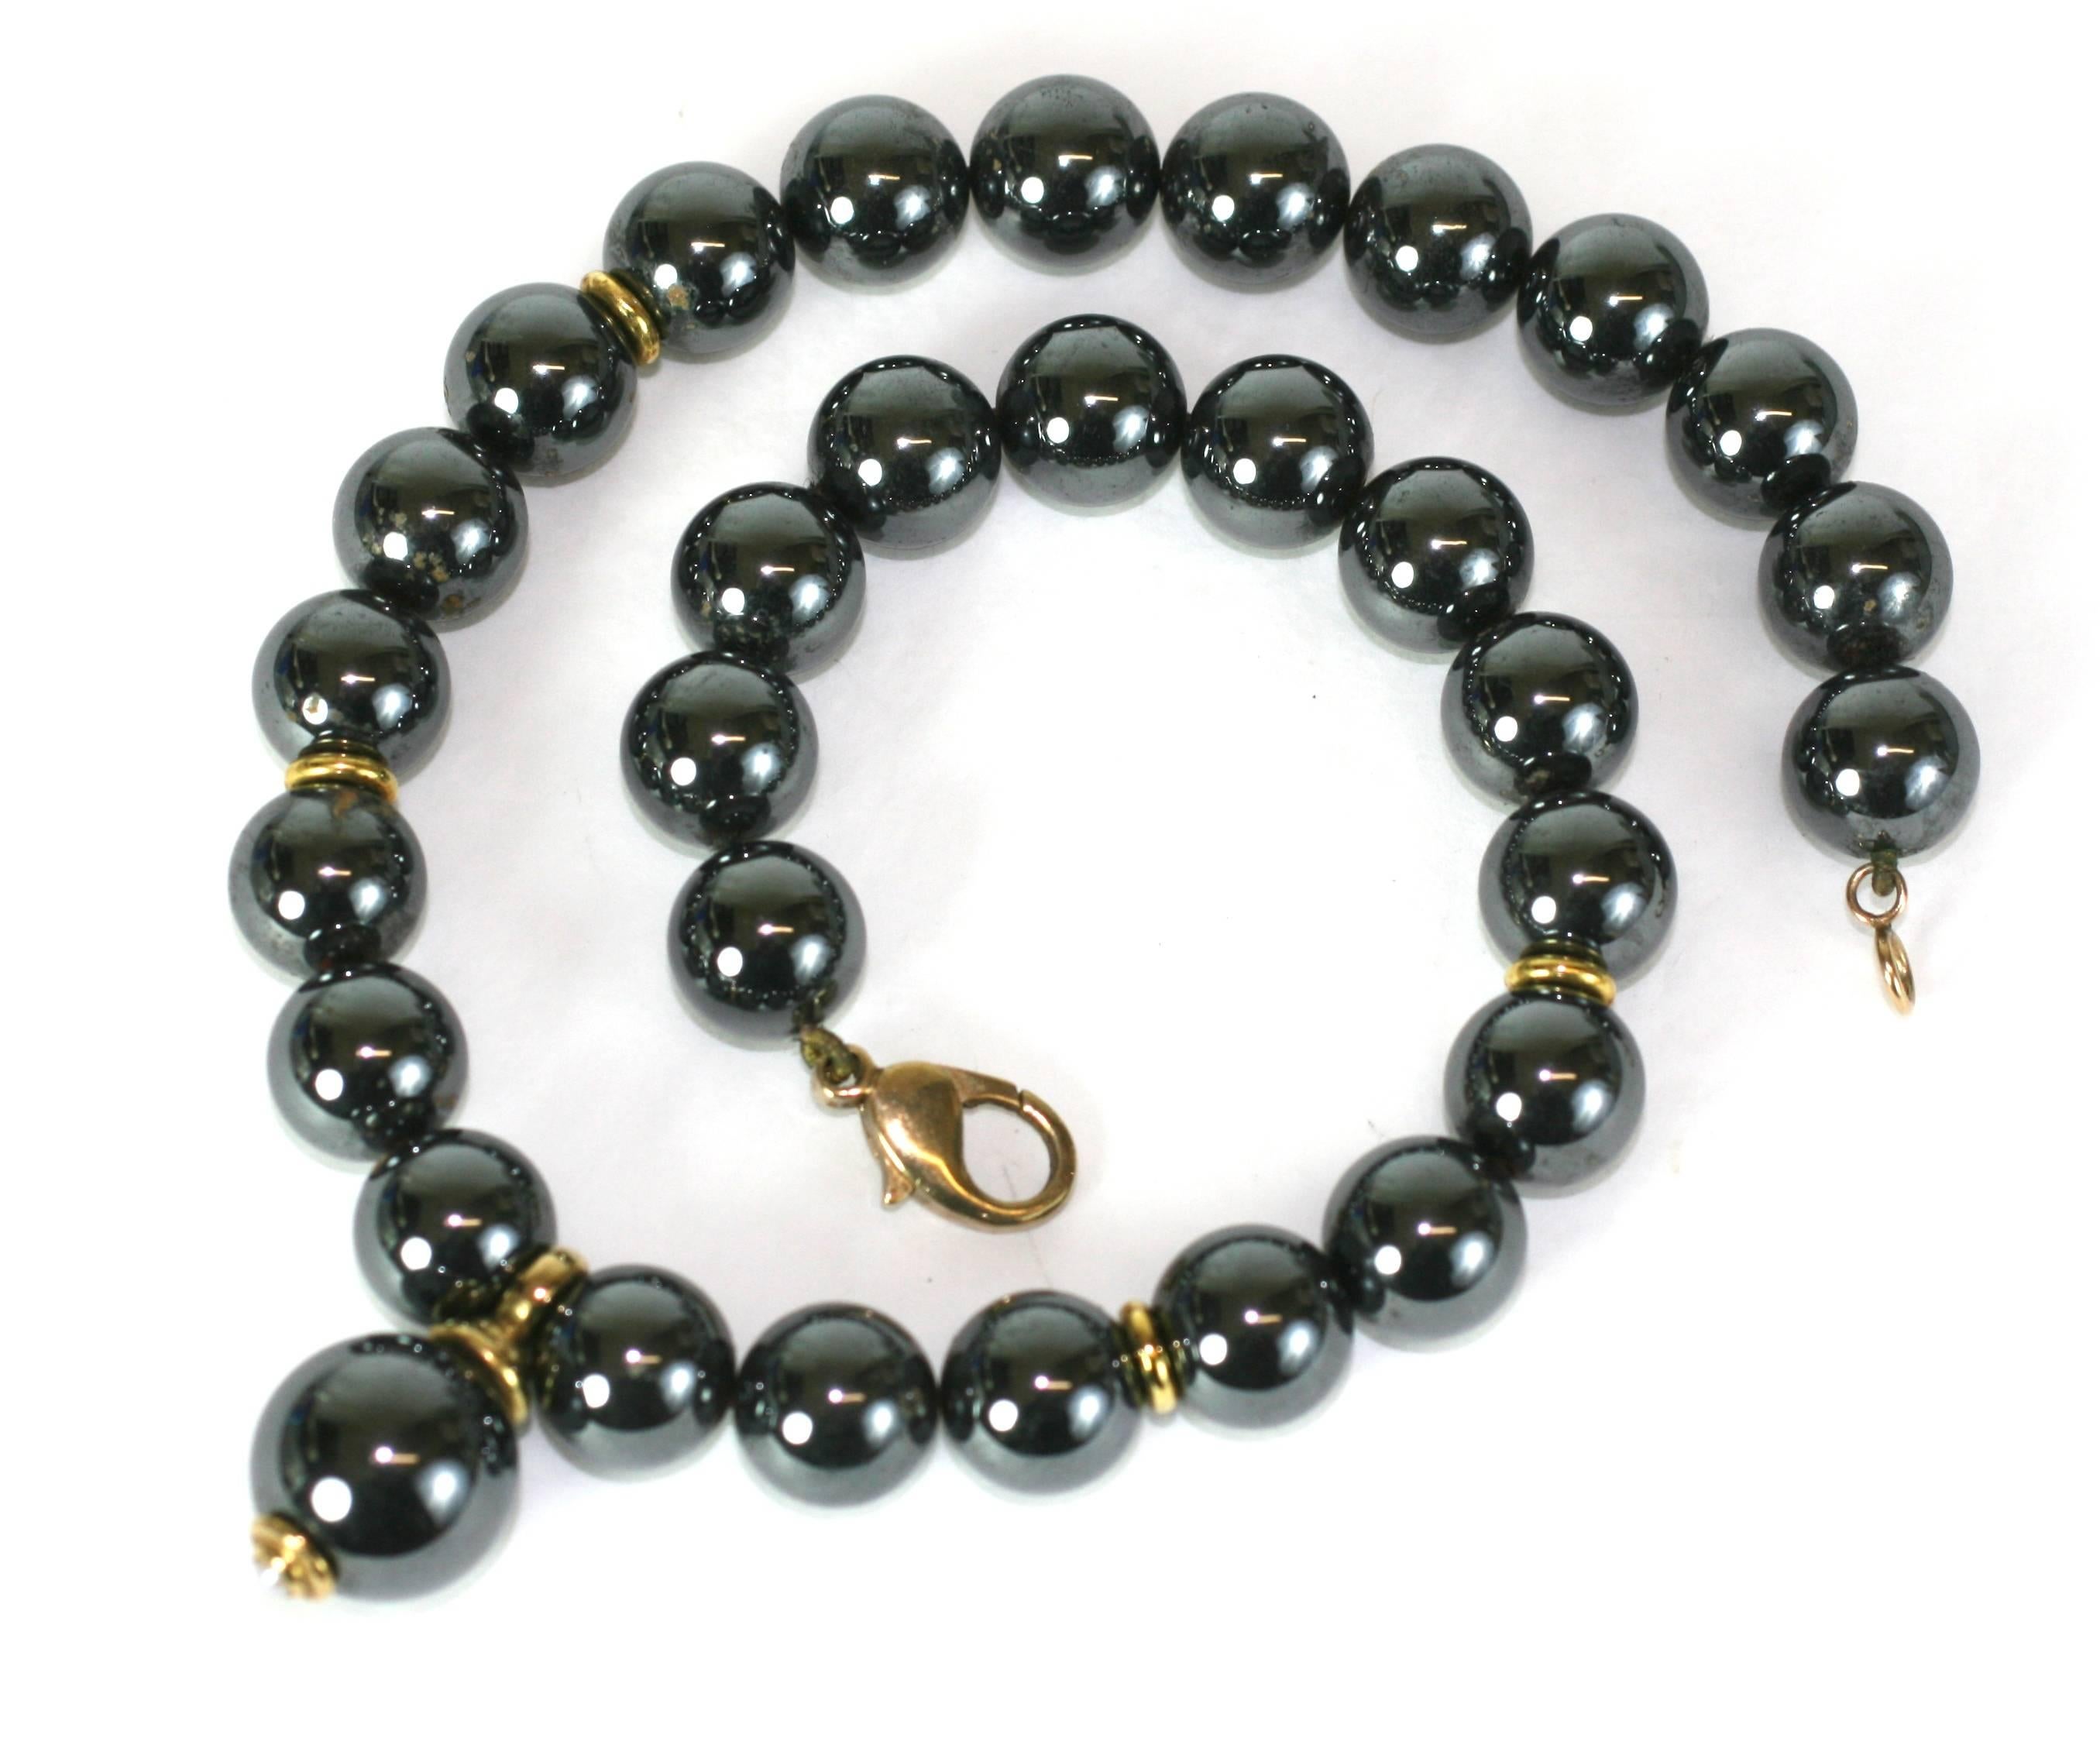 Elegant Hematite and 9k gold fittings with central drop with a pearl cap. Beads are high quality 12mm hematite beads with the larger drop measuring 1